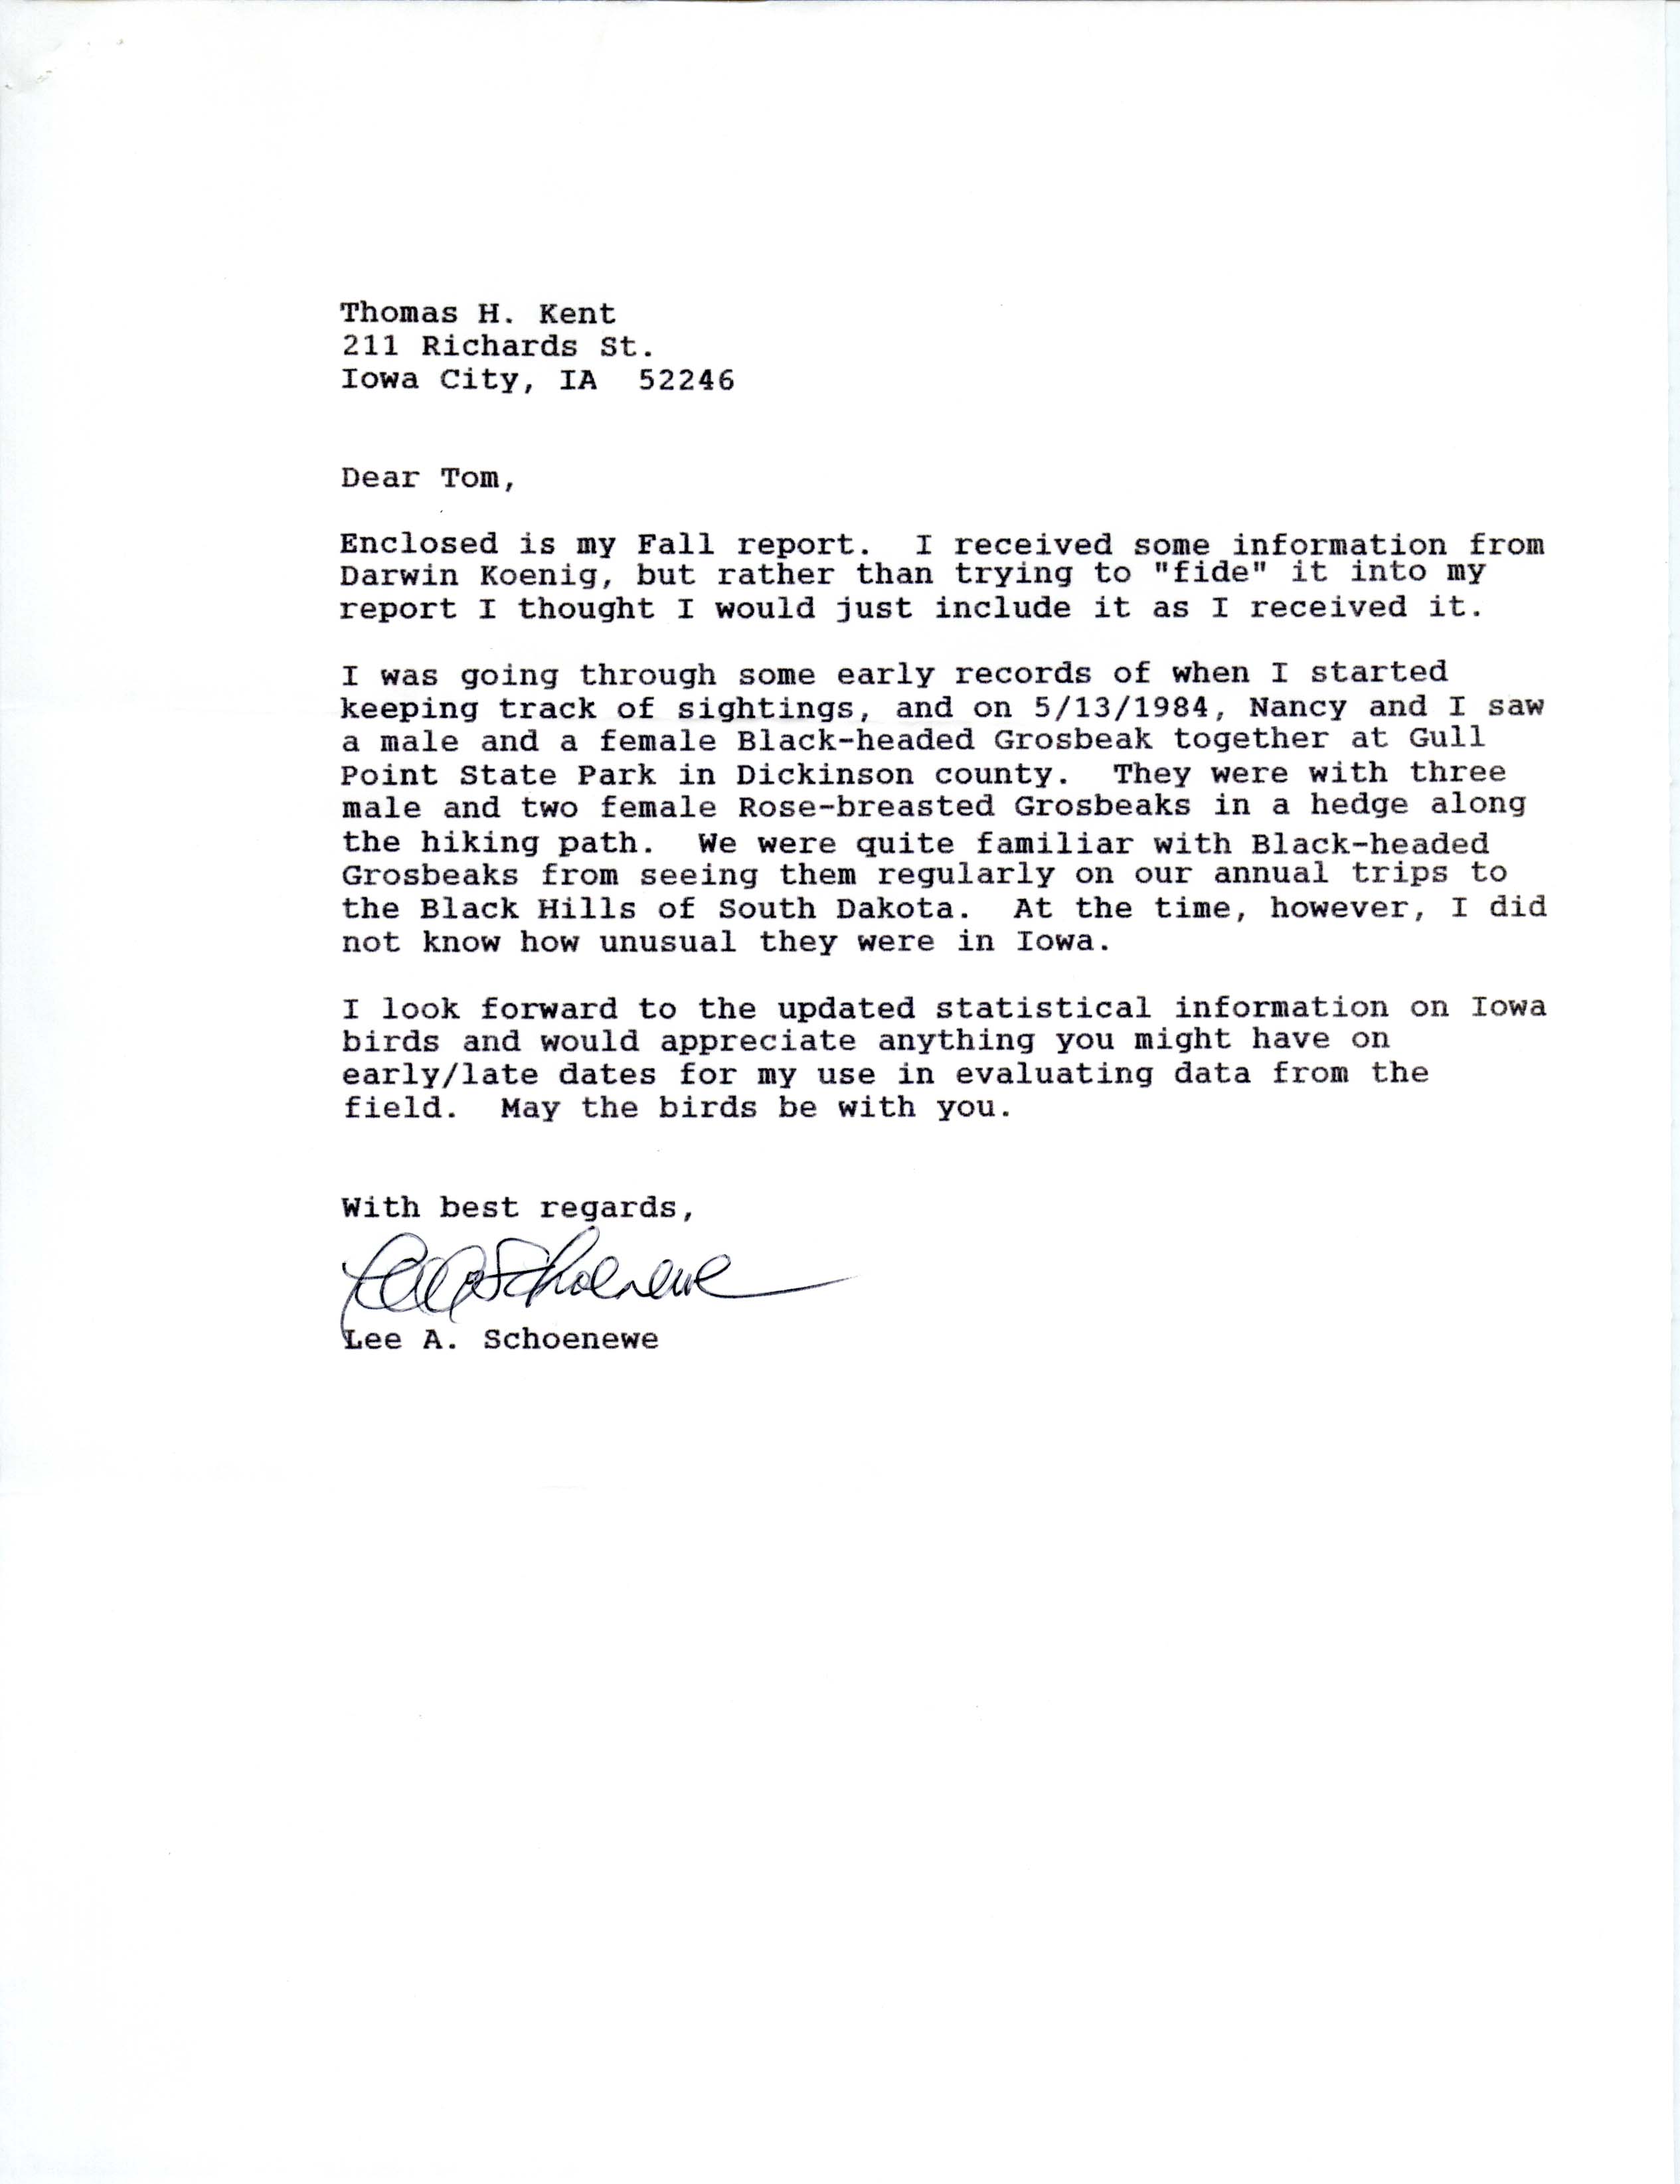 Field notes and Lee A. Schoenewe letter to Thomas H. Kent, fall 1995